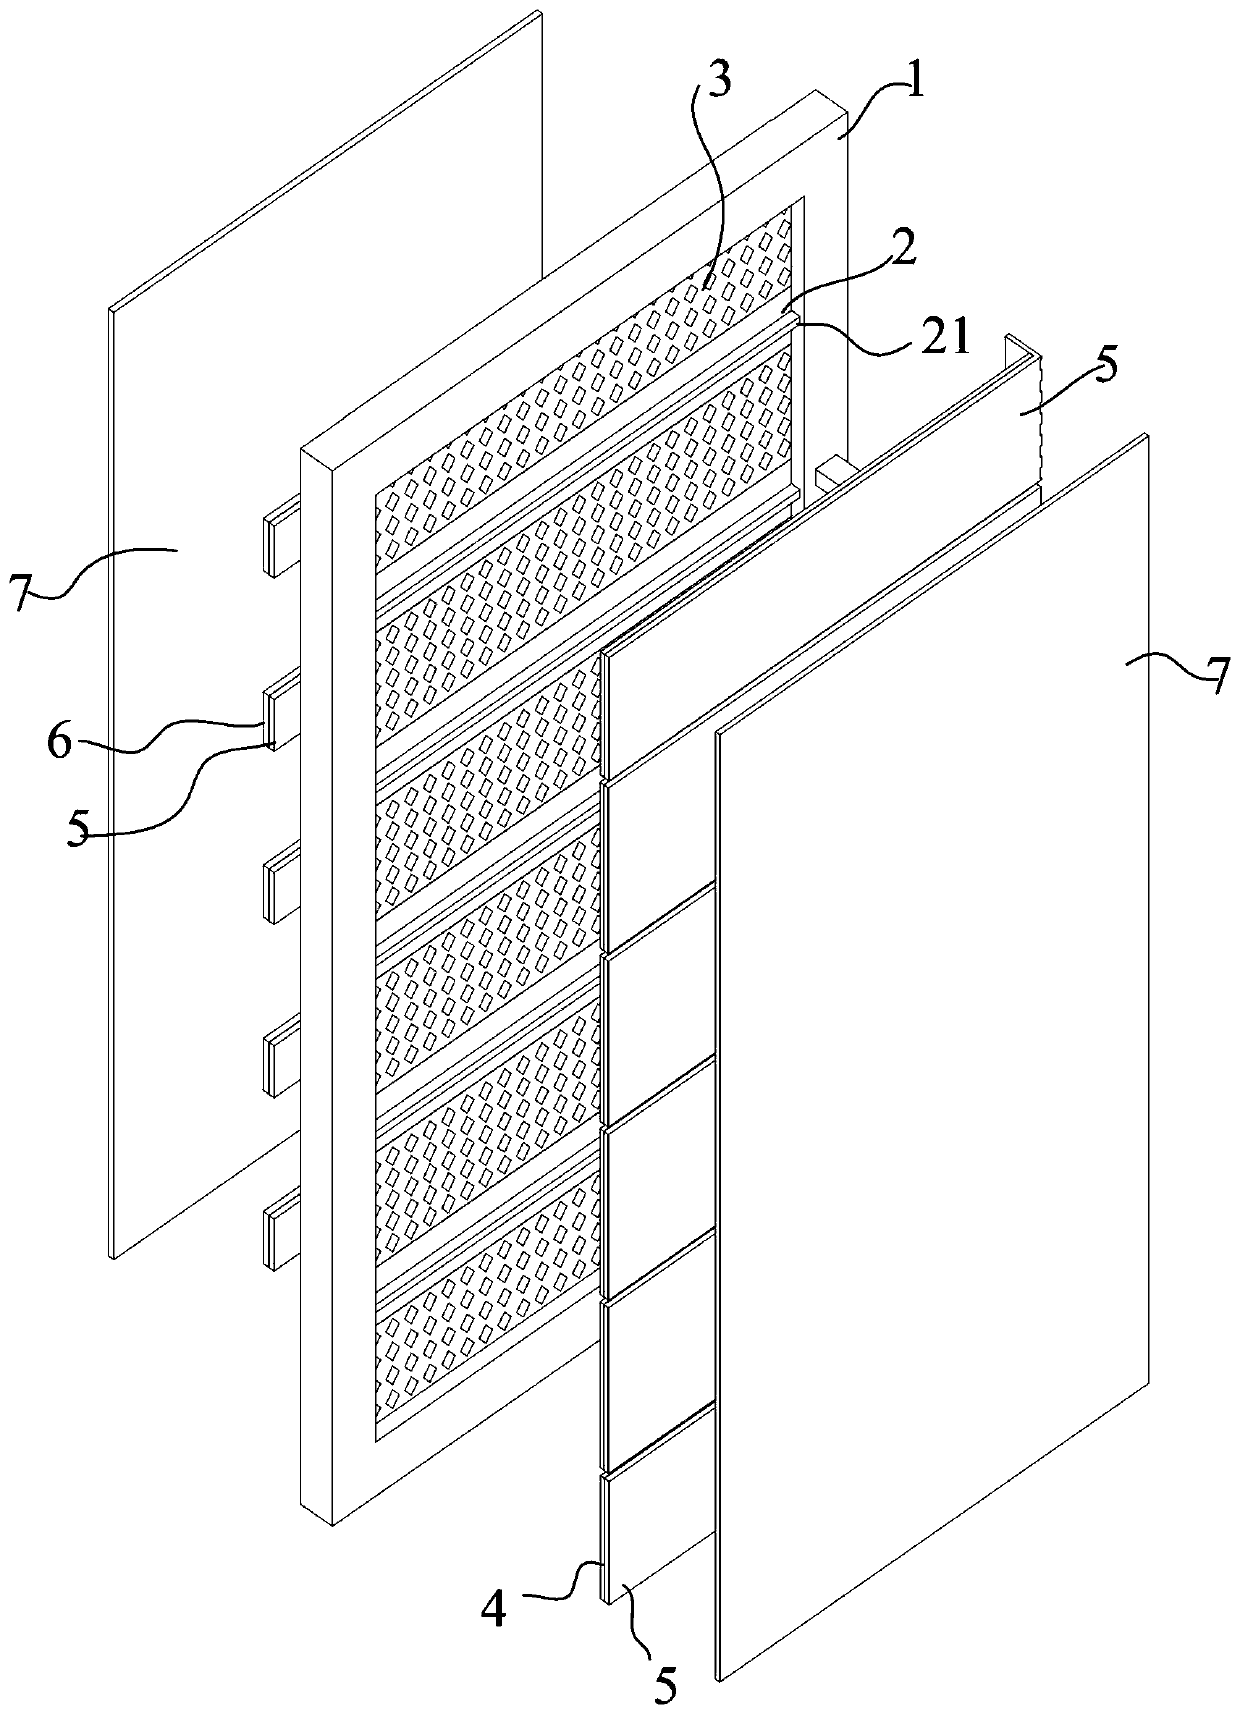 Novel plate-inserting type anti-radiation door and manufacturing method thereof